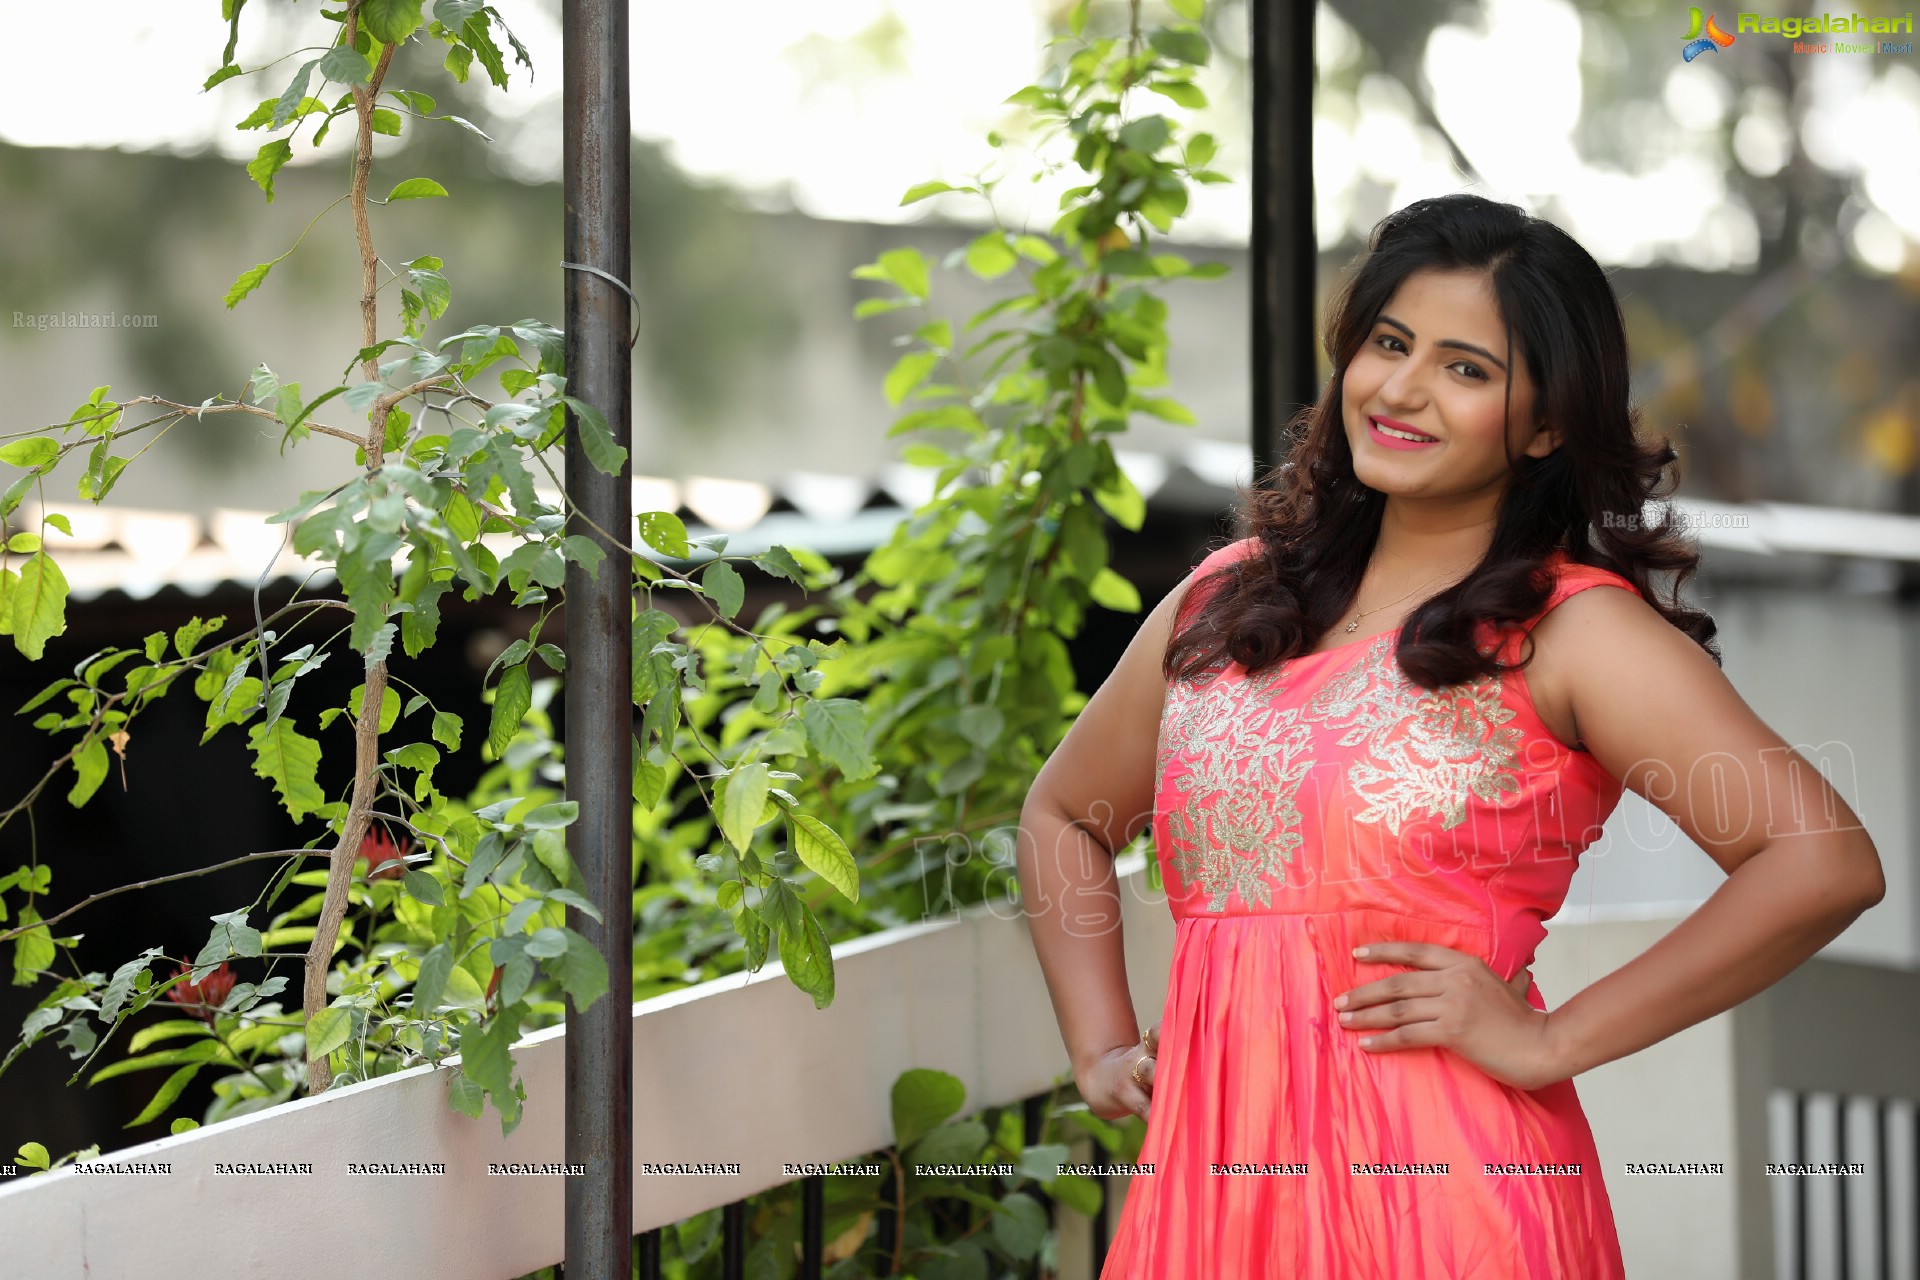 Swathi Reddy (Exclusive) (High Definition)